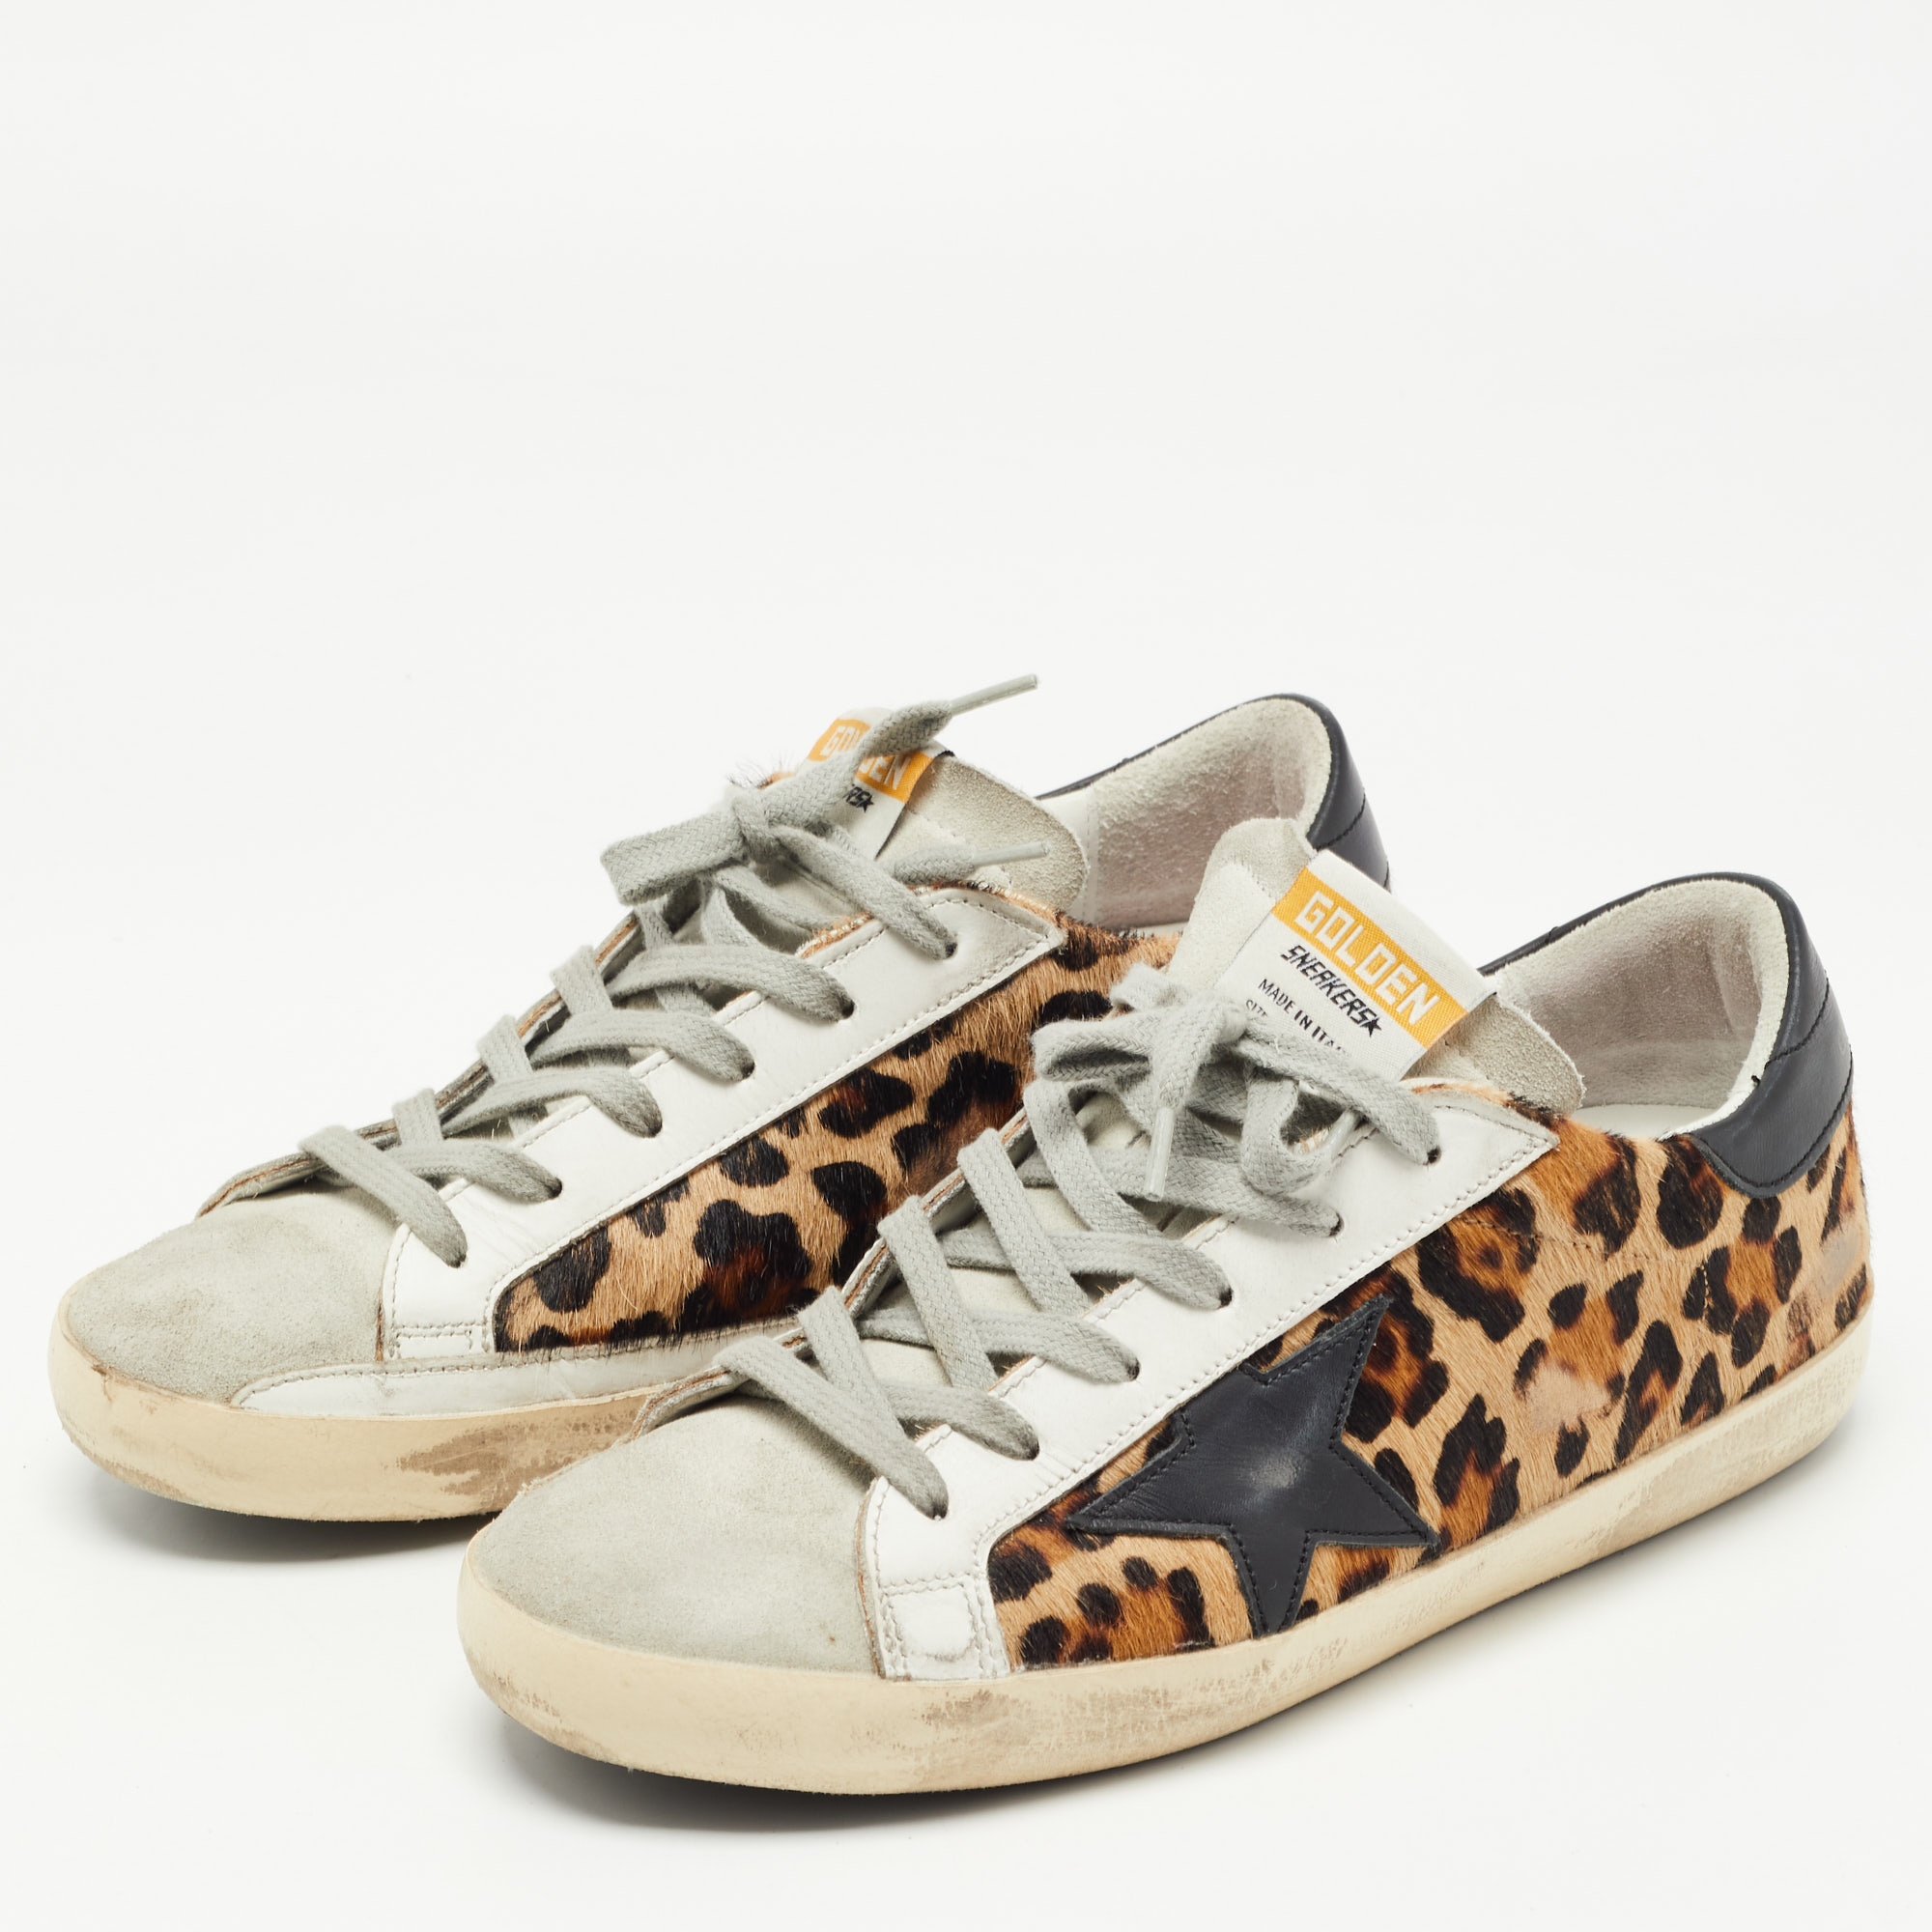 

Golden Goose Tricolor Leopard Print Calf Hair and Leather Superstar Sneakers Size, Brown